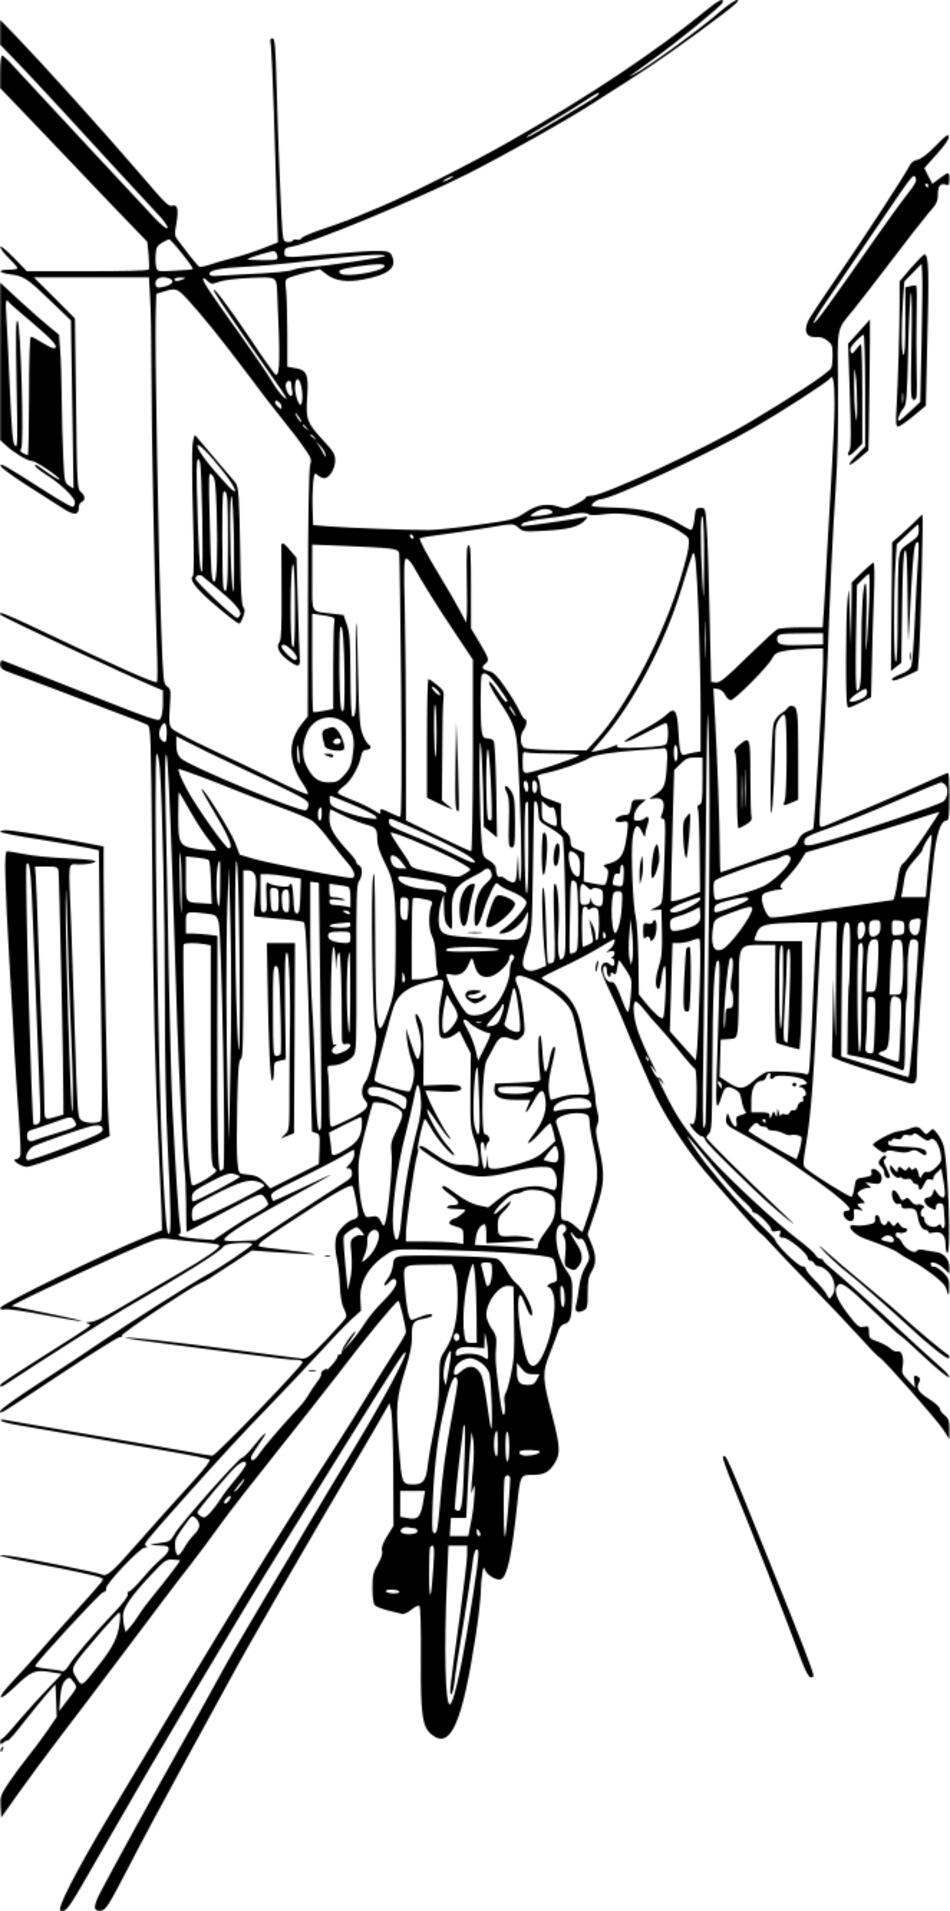 Coloring book Bicycles on roads and paths (Vertical)